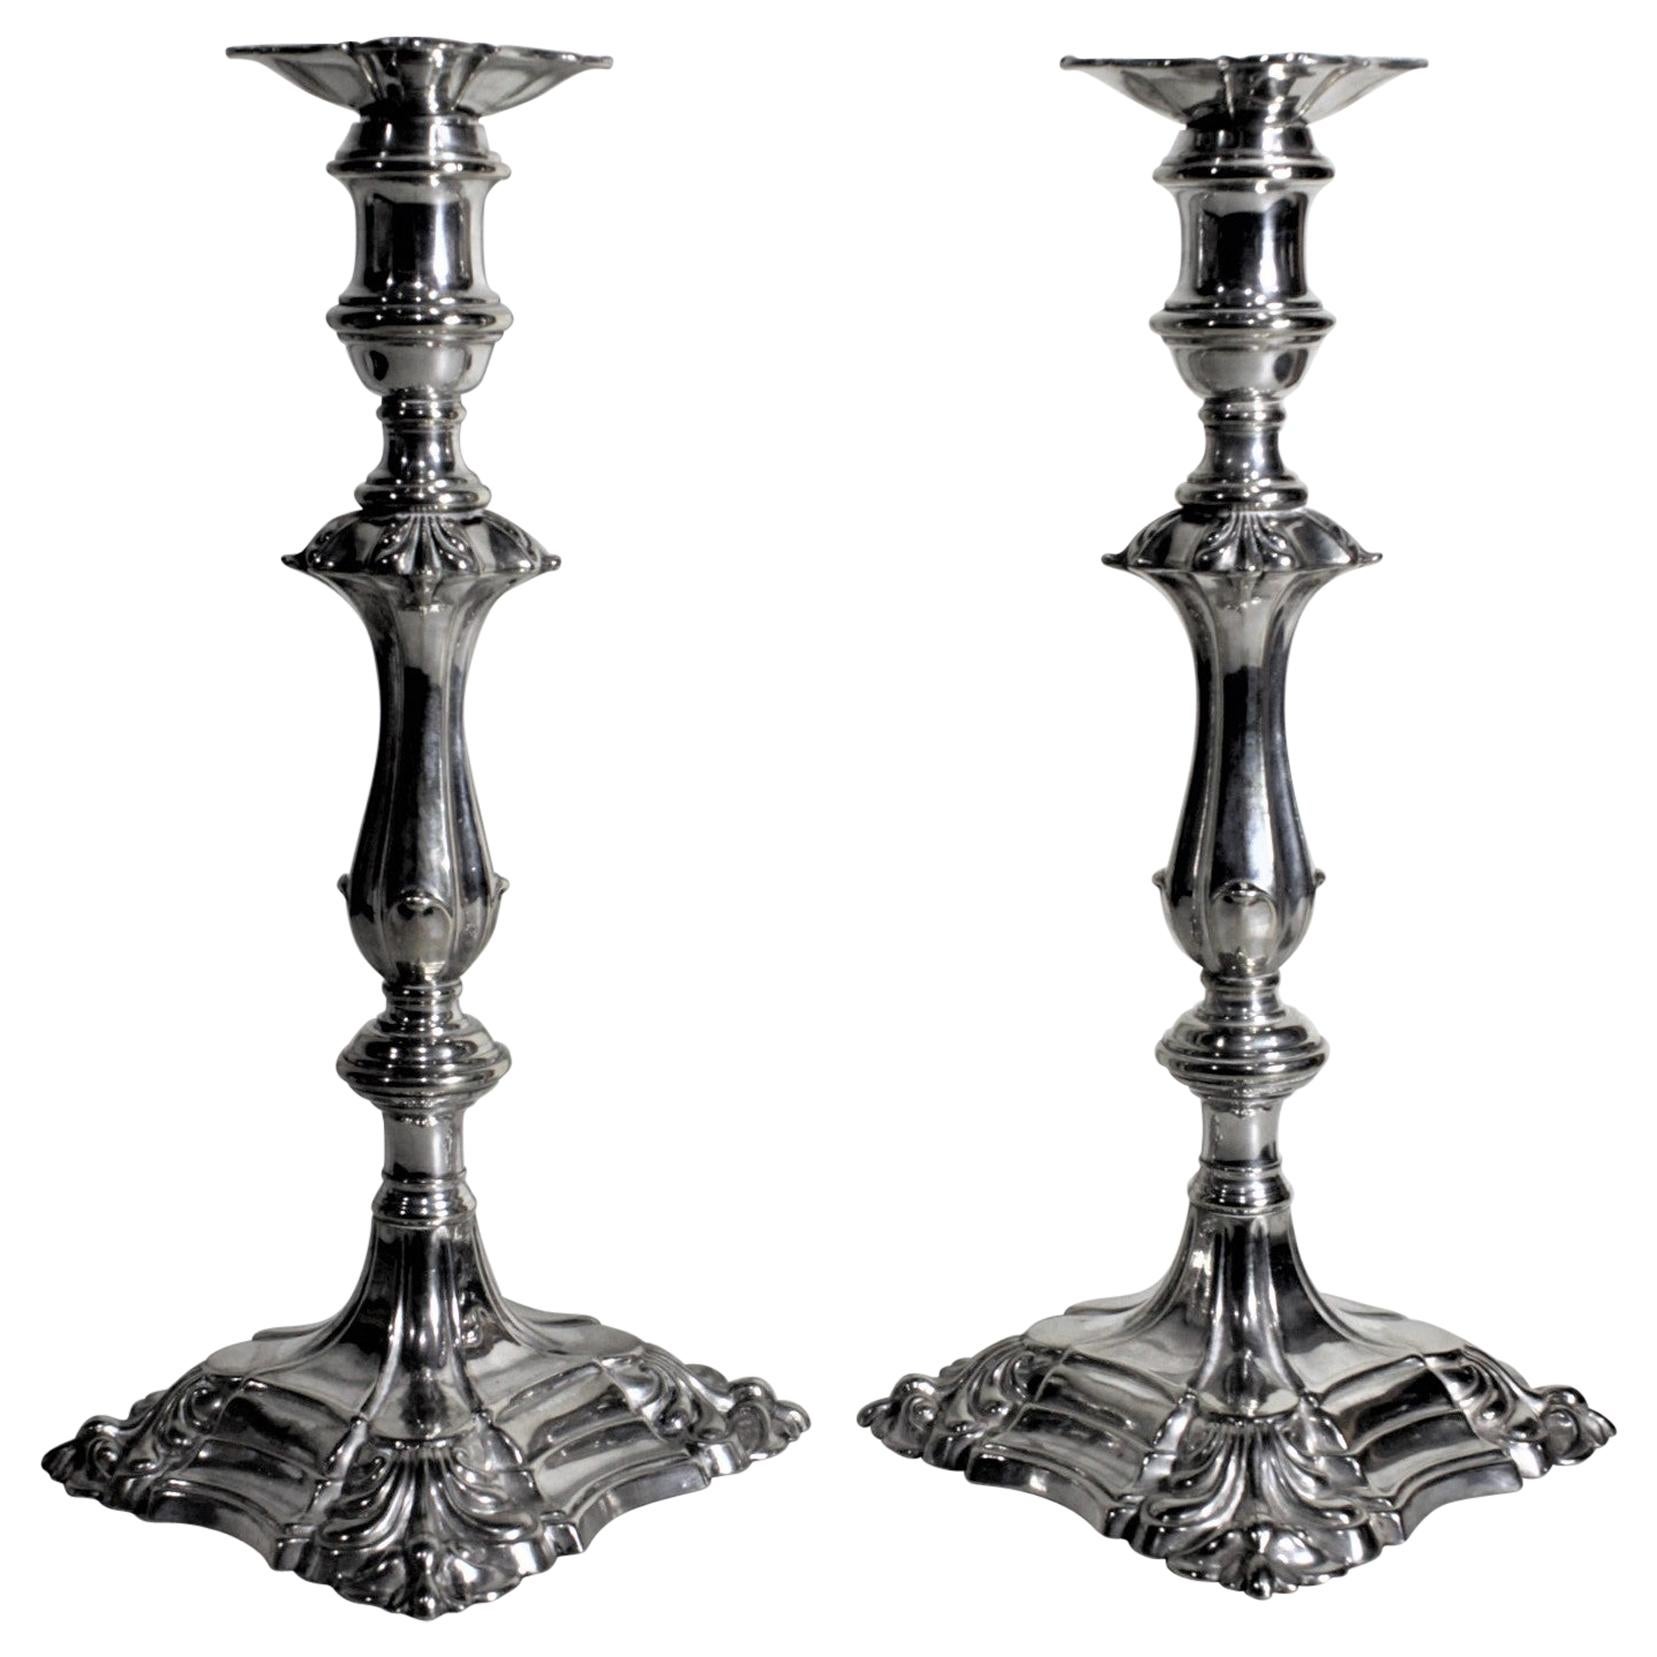 Pair of Antique English Edwardian Silver Plated Candlesticks